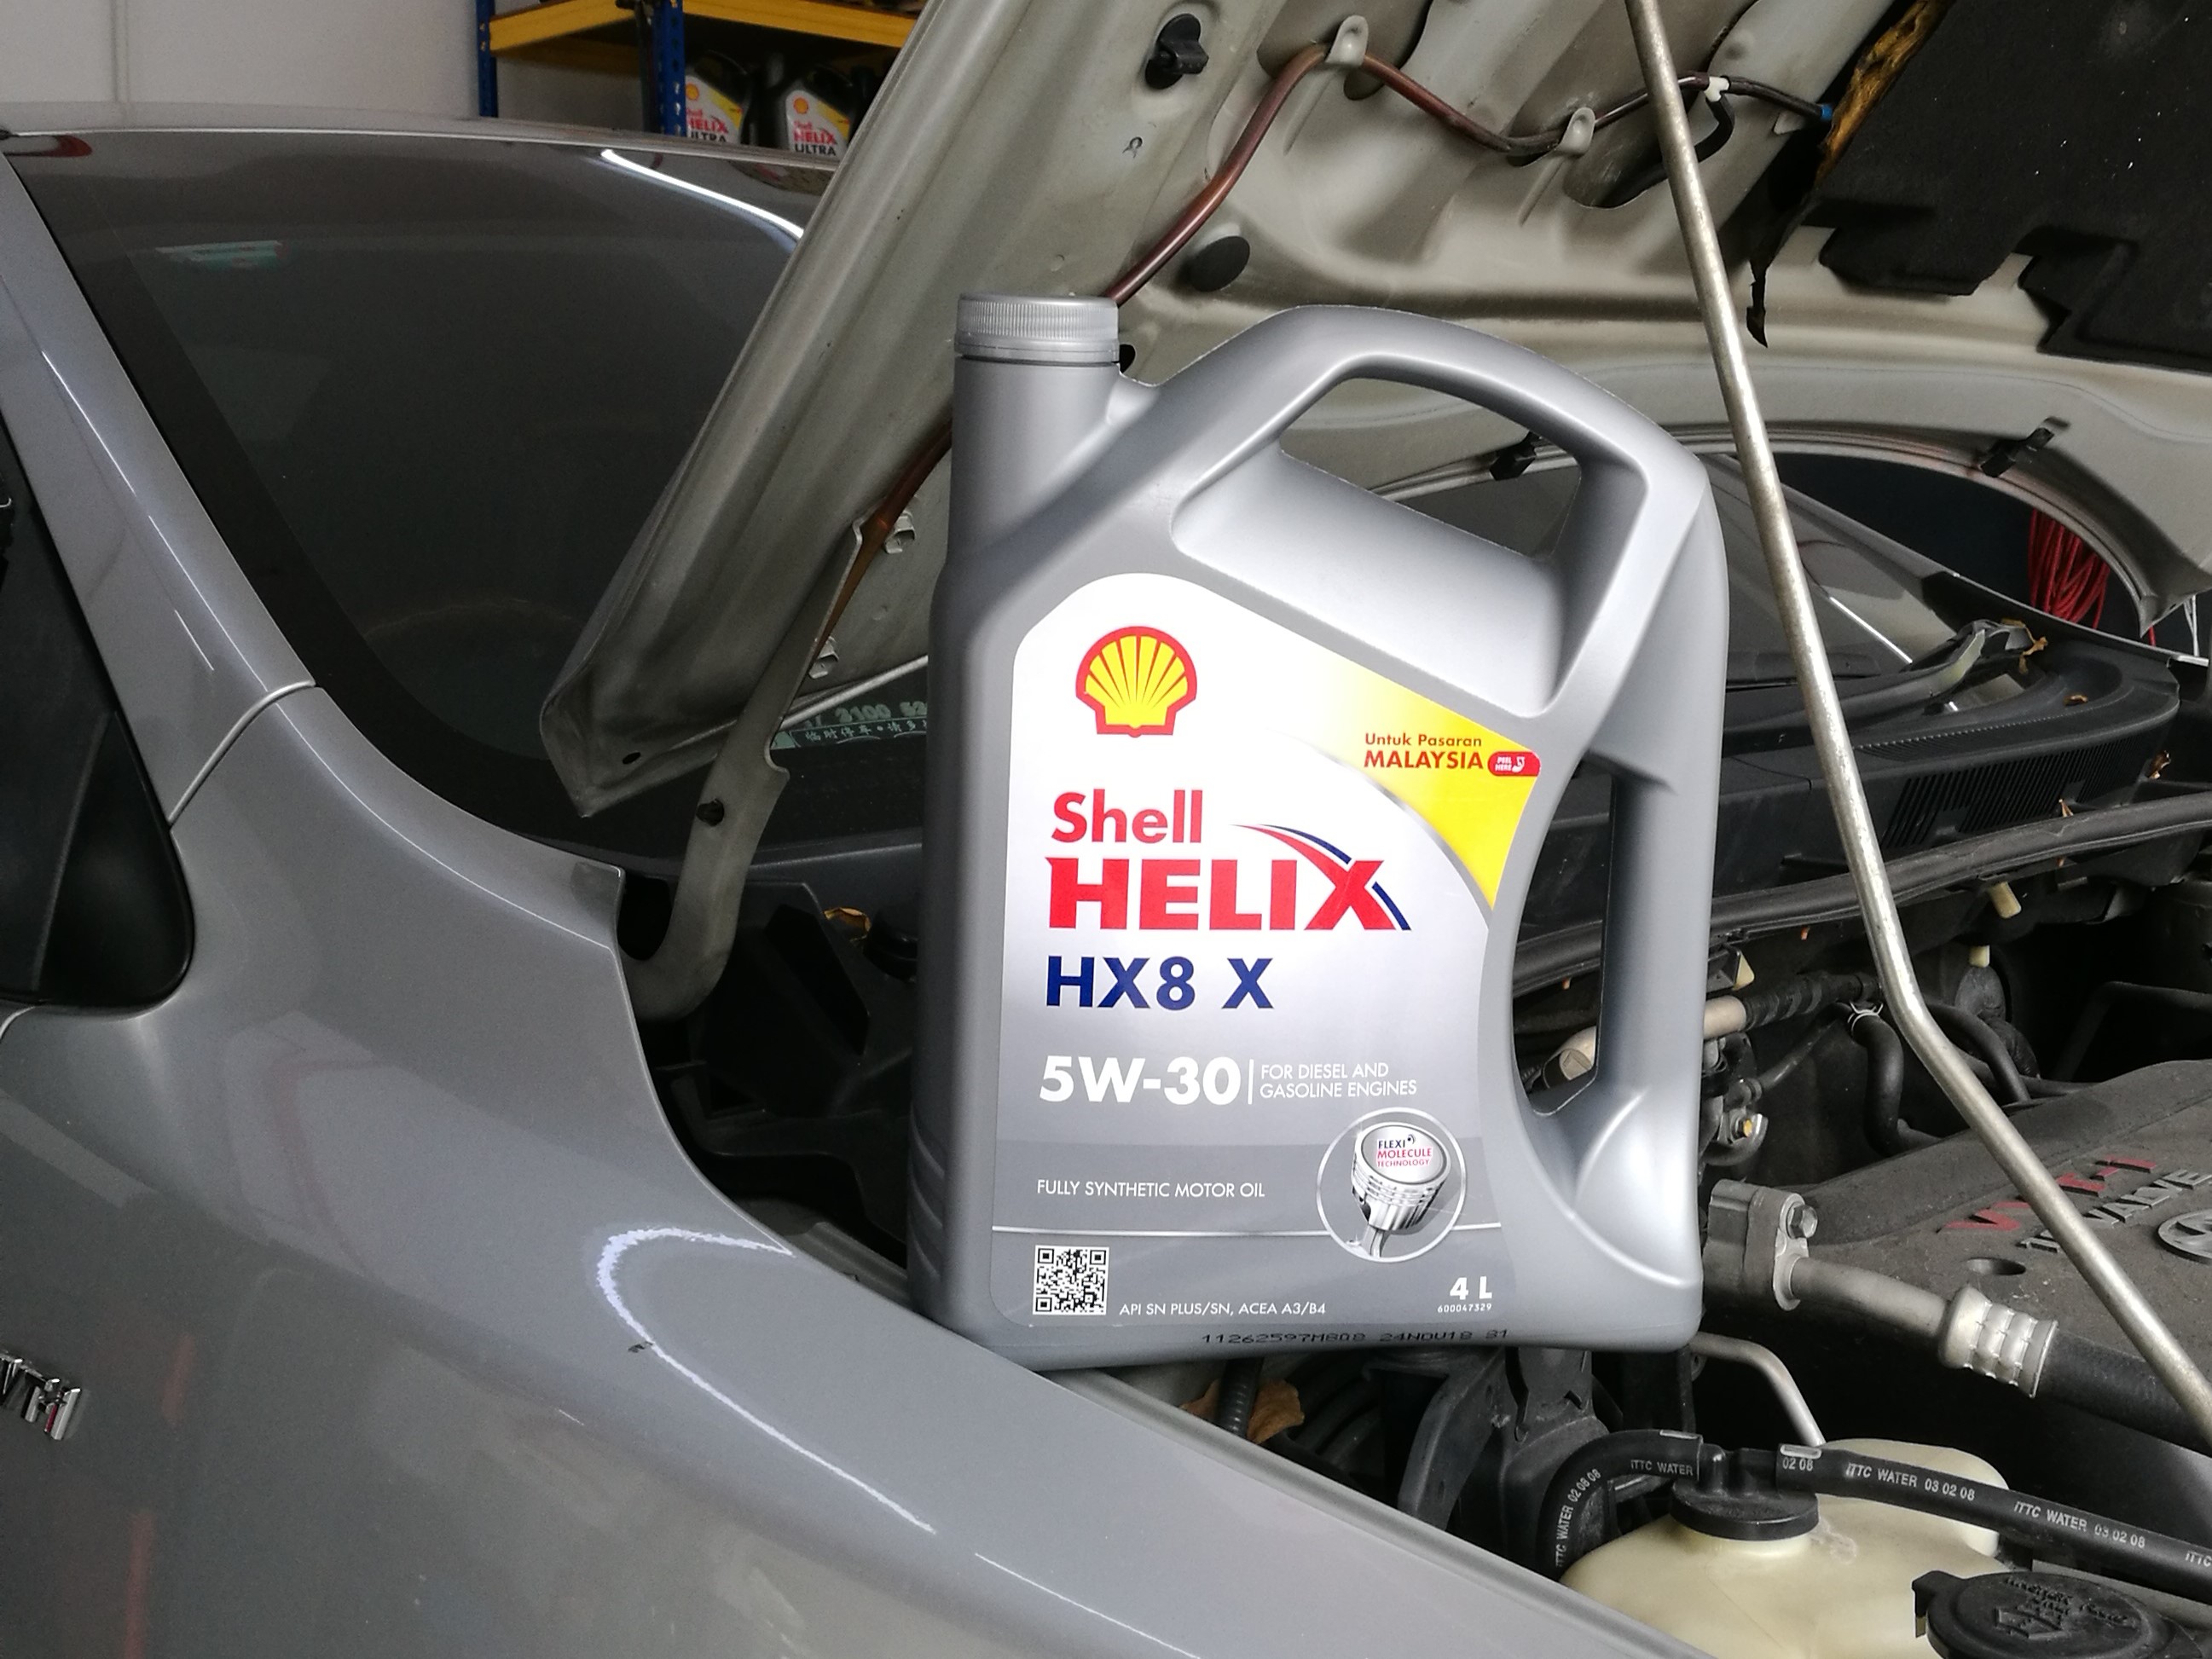 New Shell Helix Hx8 One Of The Most Affordable Fully Synthetic Engine Oils In Malaysia 3